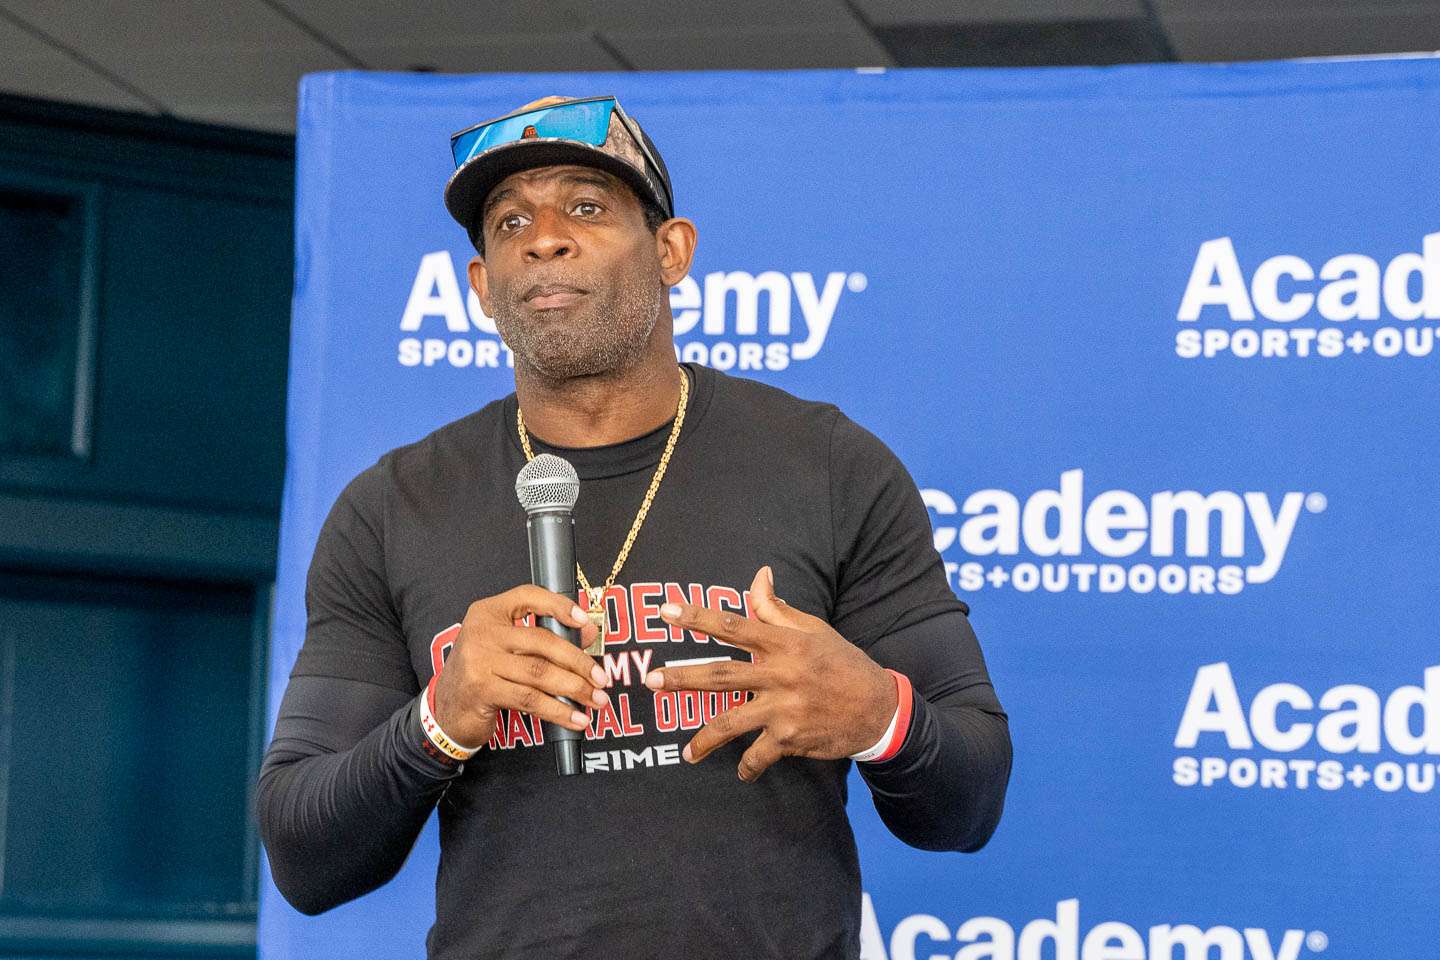 Deion spoke passionately about wanting to help young men struggling to play football and work jobs to stay in school. 